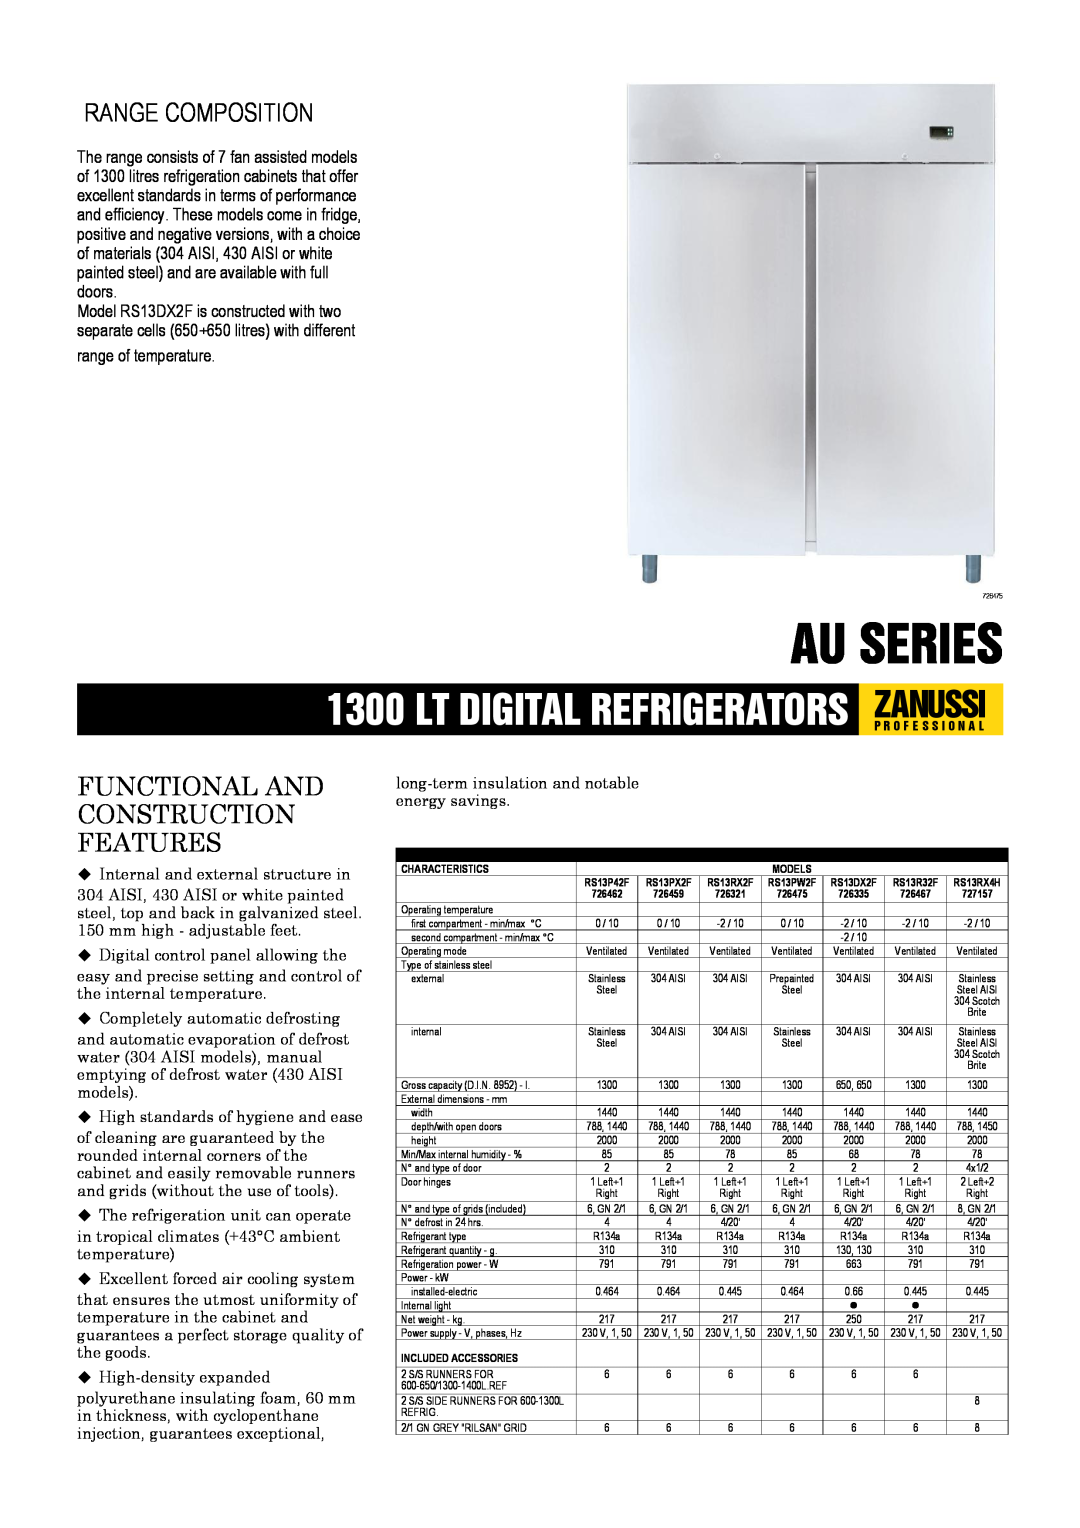 Zanussi 726459, 726335, 726462, 726475, 727157 dimensions Au Series, Range Composition, Functional And Construction Features 